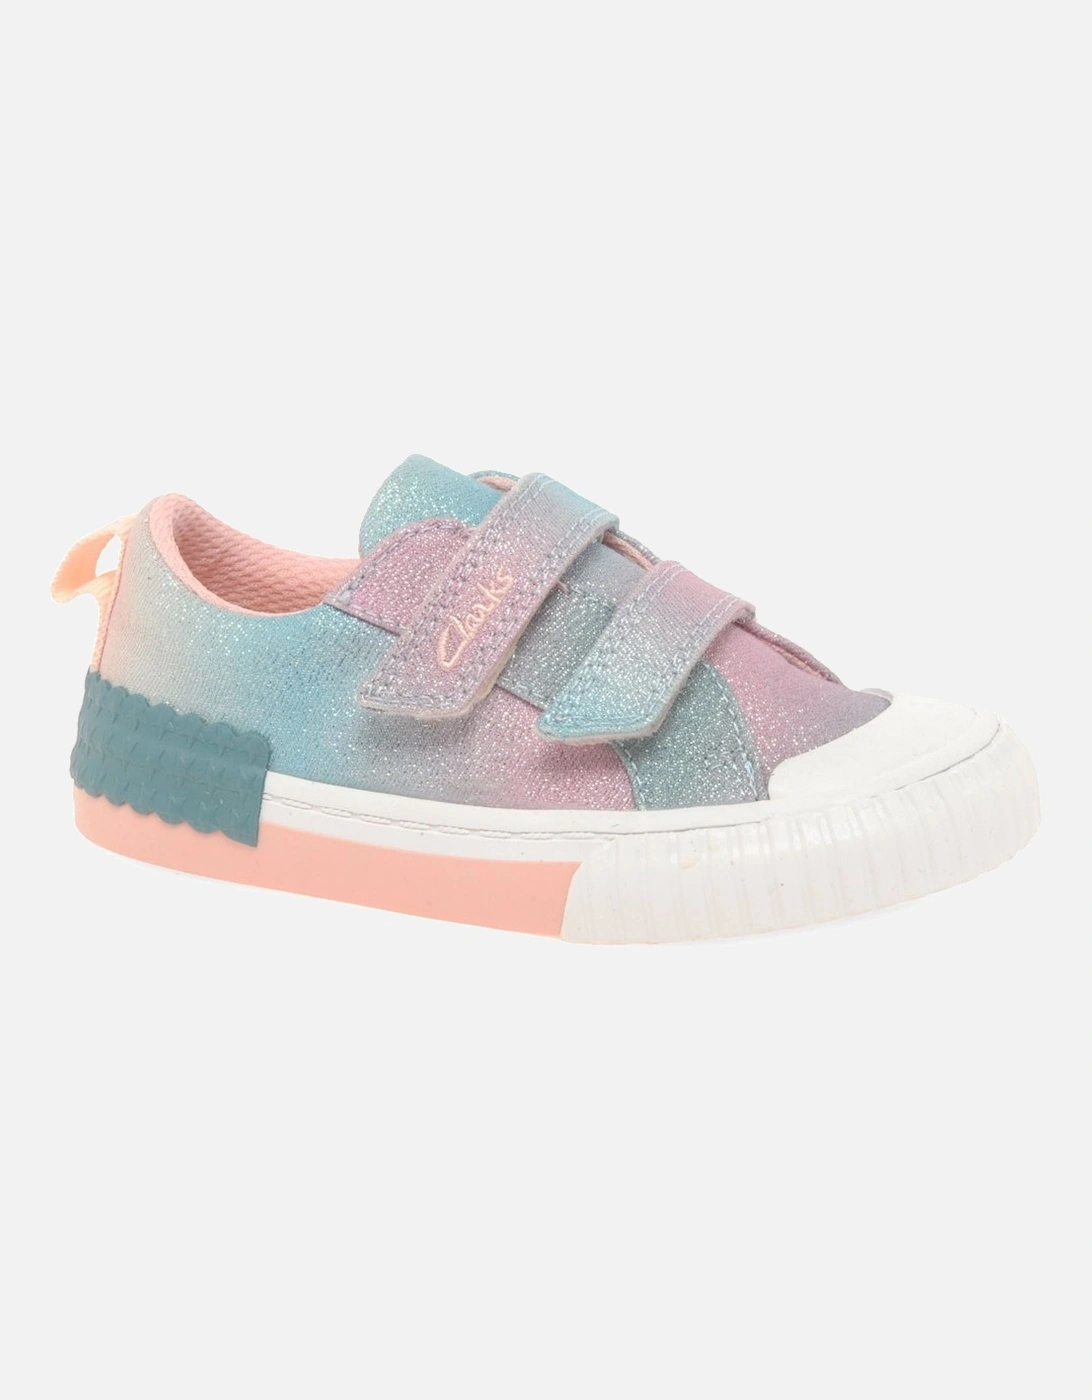 Foxing Brill K Girls Canvas Shoes, 7 of 6